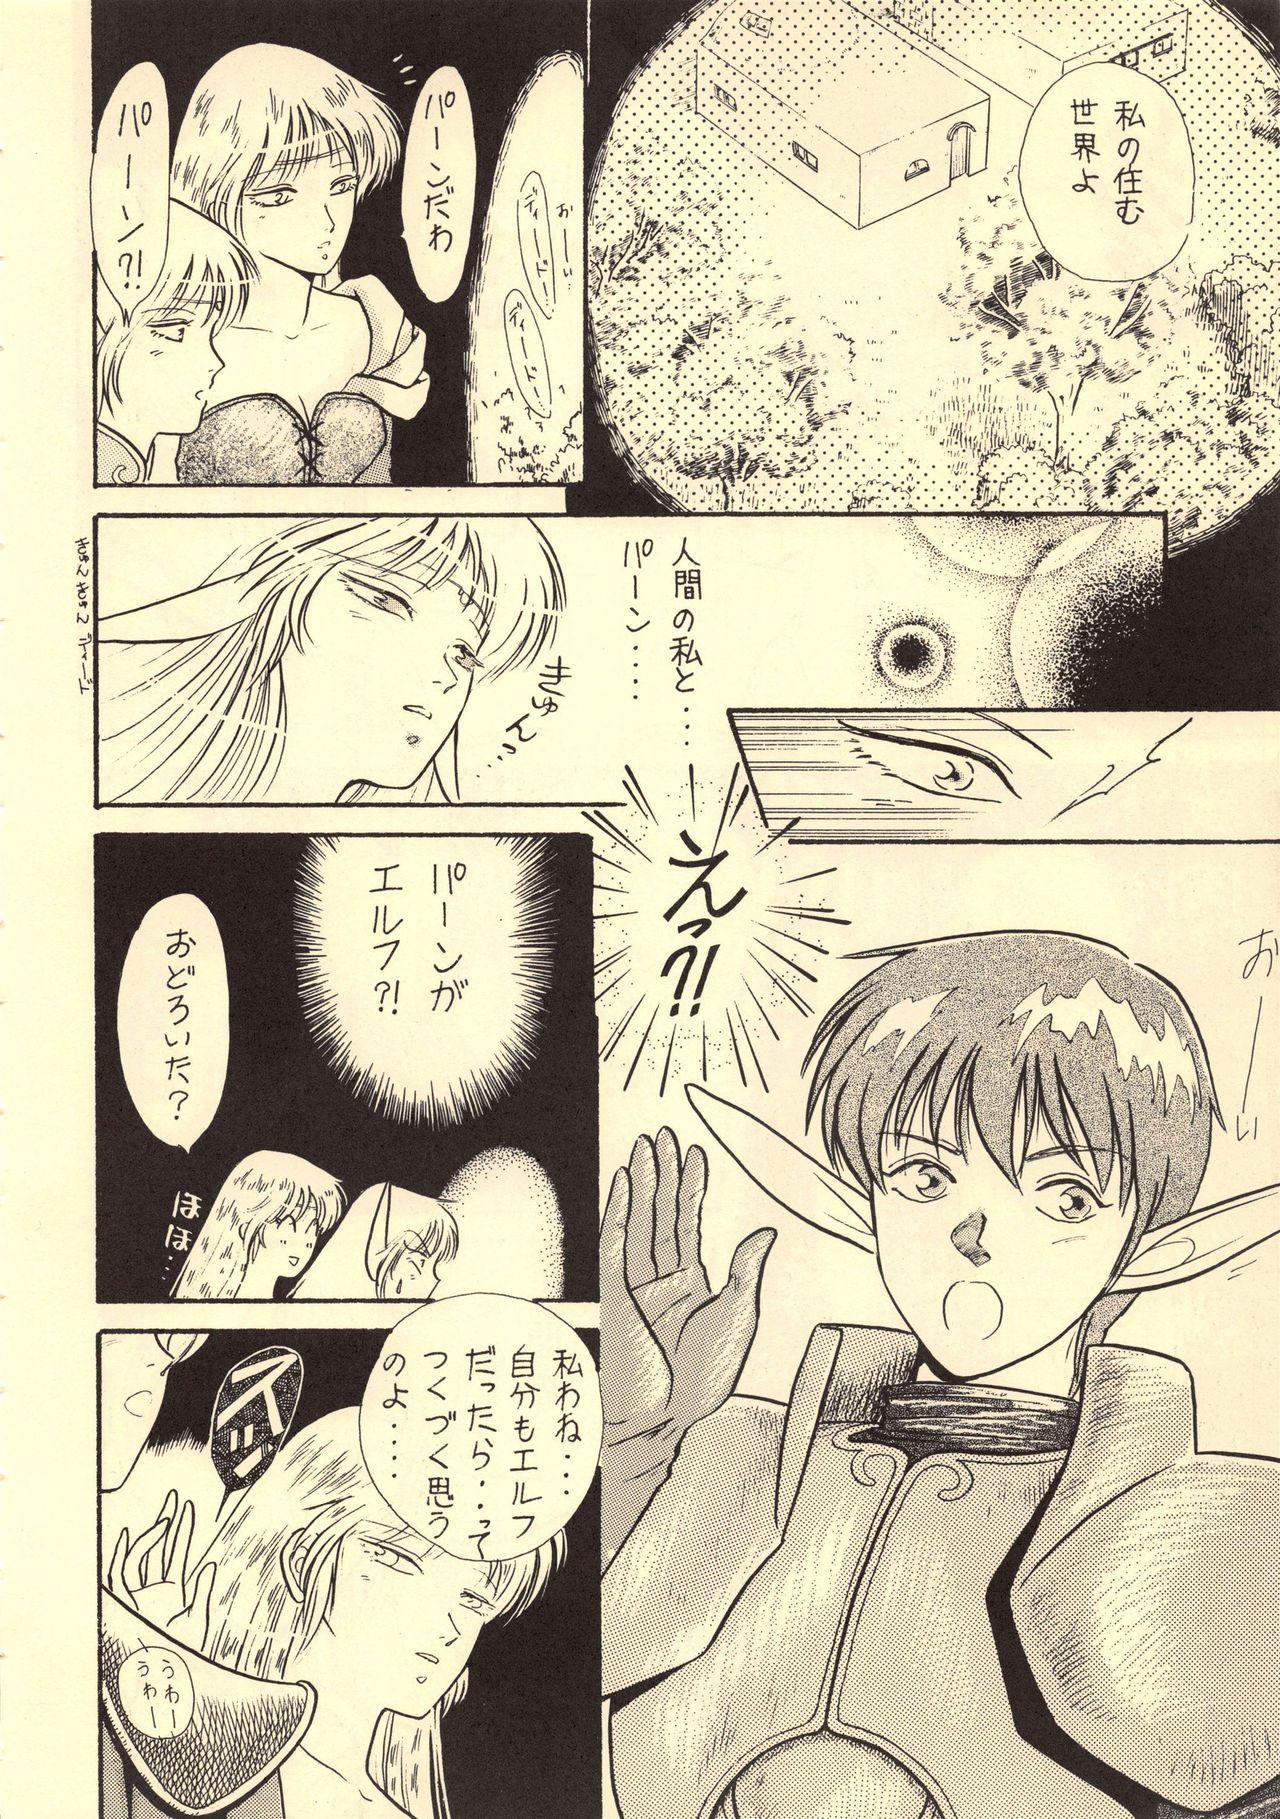 Animated Elf no Musume Kaiteiban - Die Elfische Tochter revised edition - Record of lodoss war Huge - Page 10